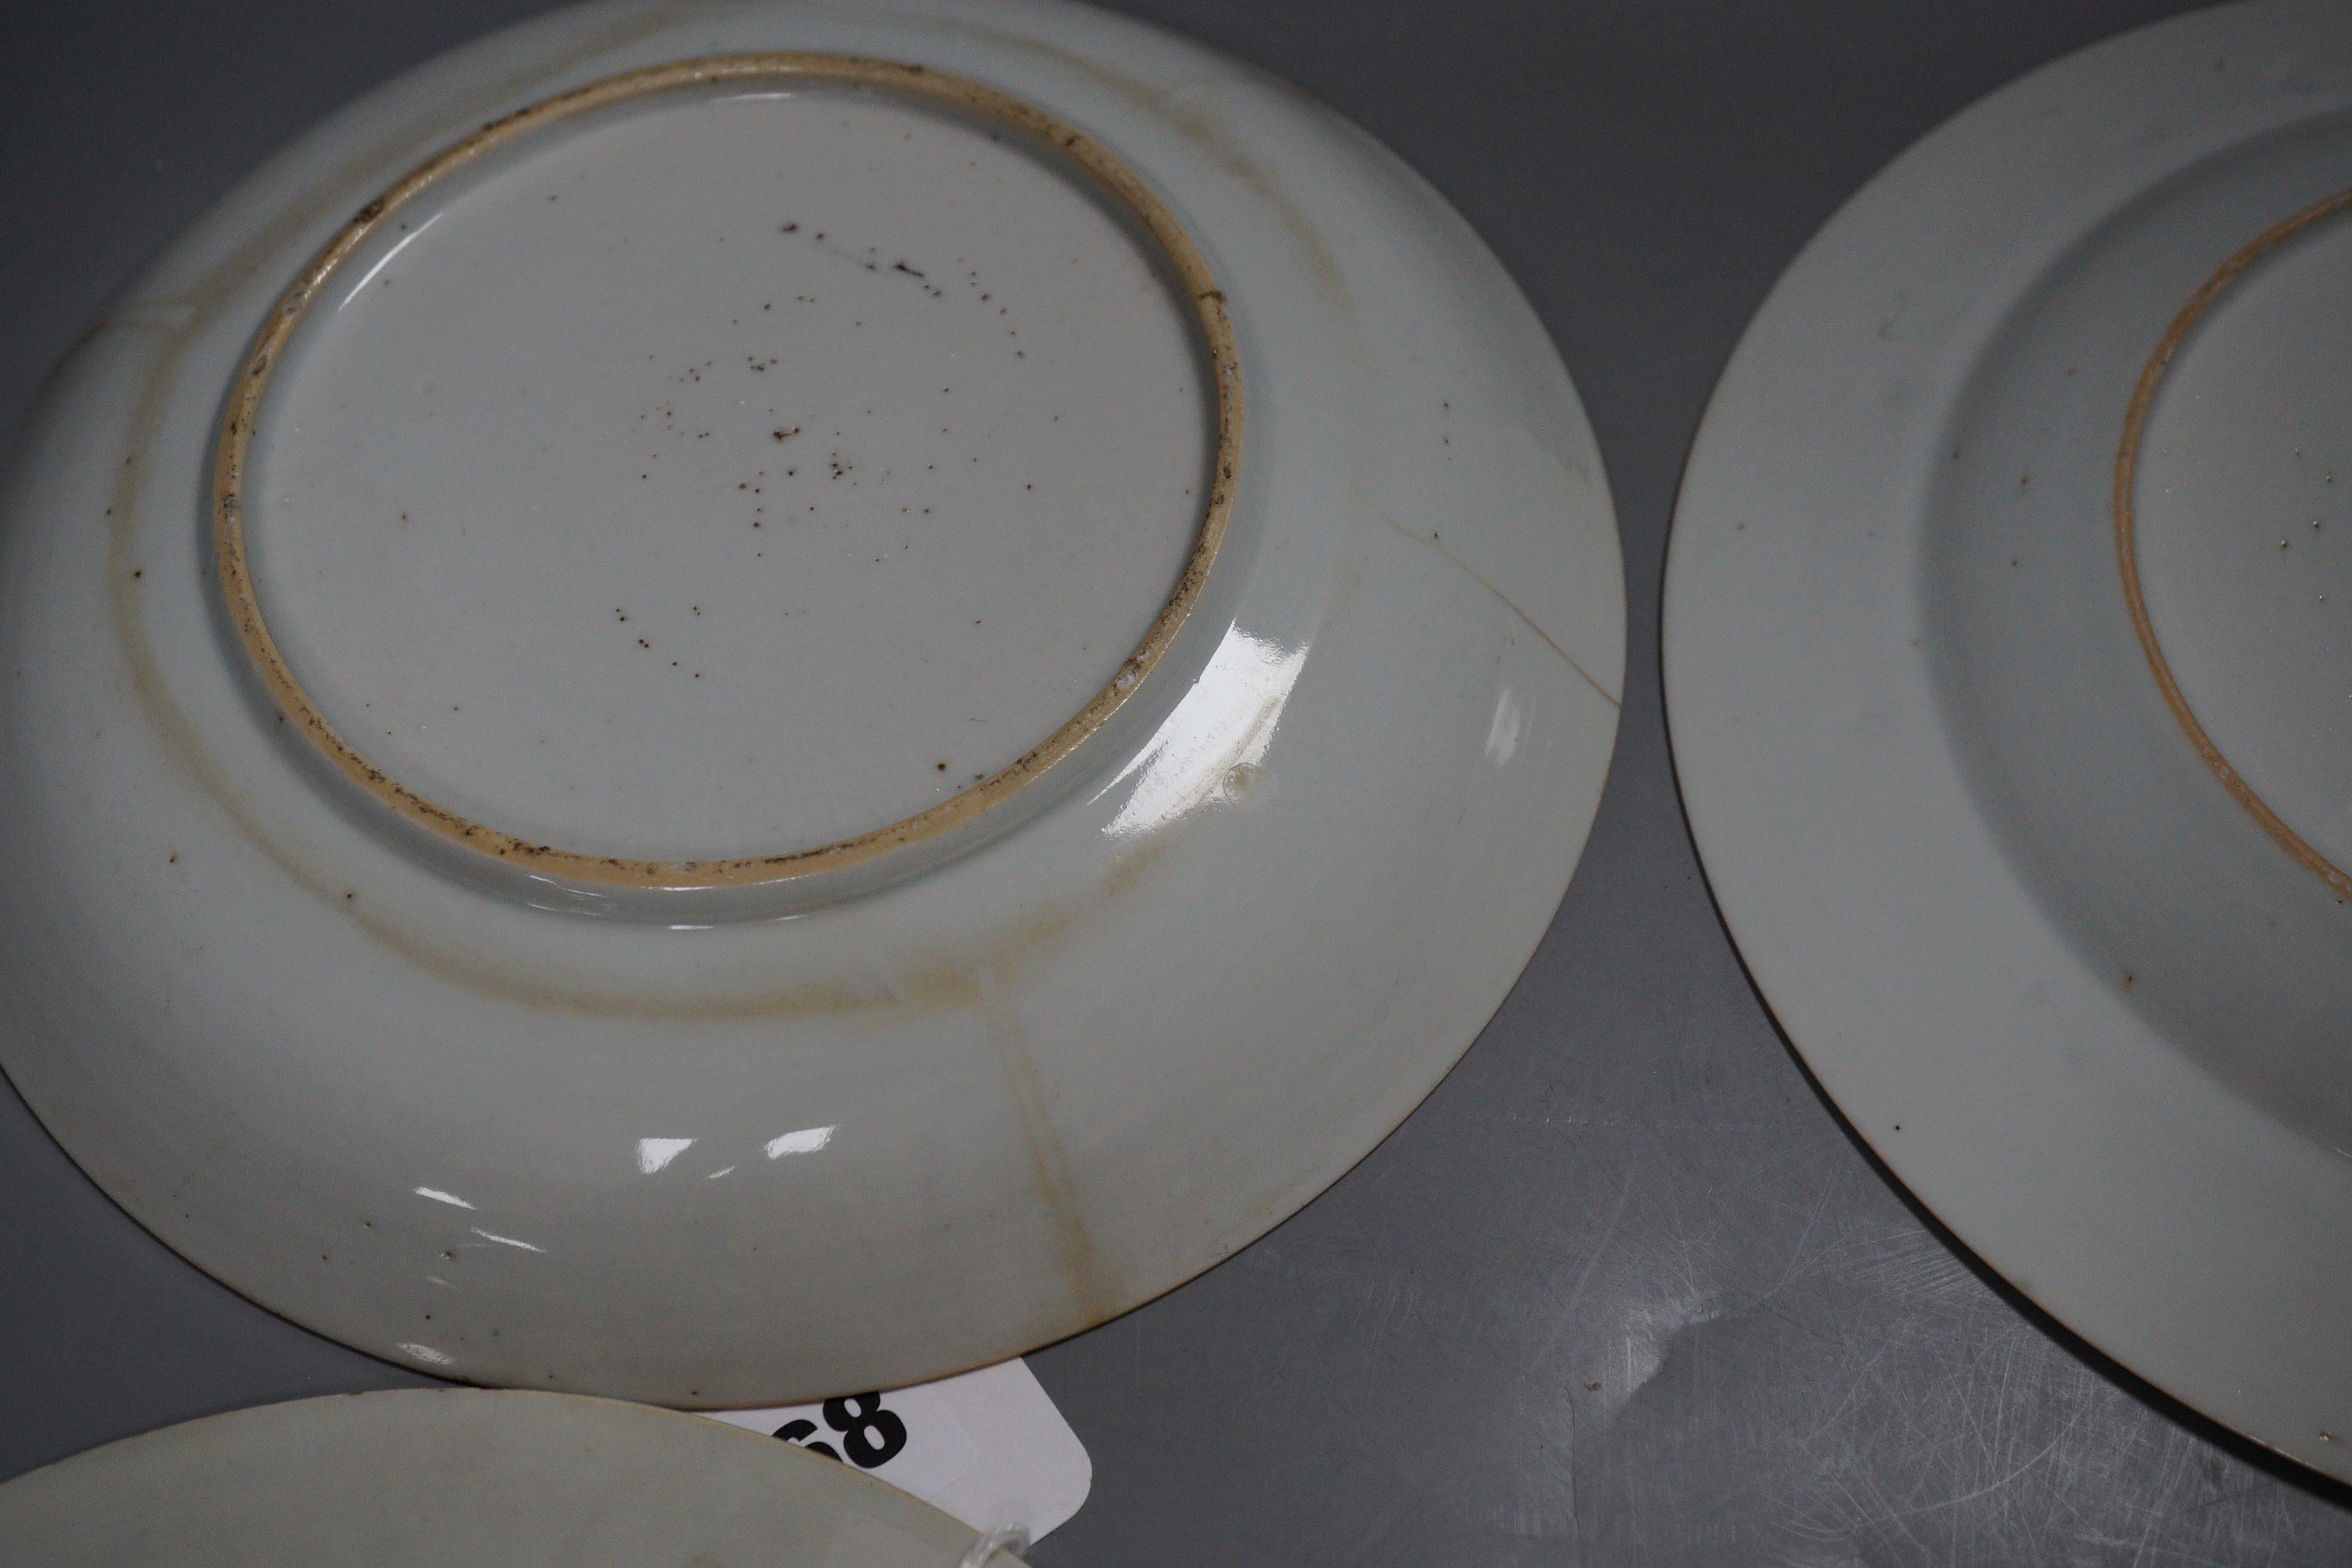 A pair of 18th century Chinese export plates and two others